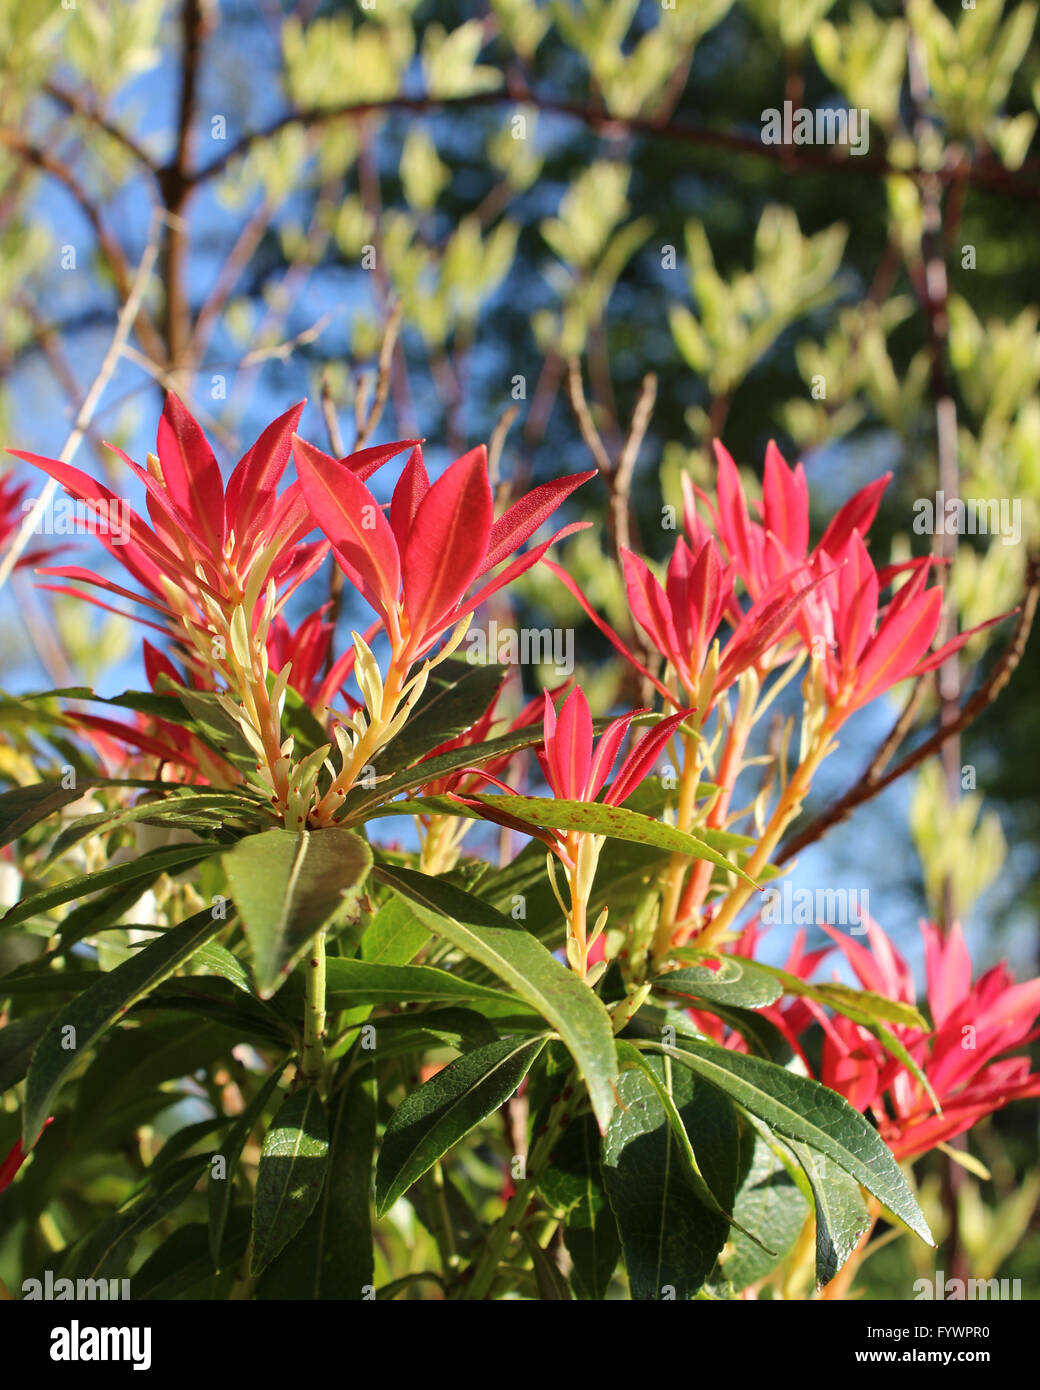 Fresh new spring growth of Pieris japonica, also known as Flame of the Forest or Lilly of the Valley plant. Stock Photo